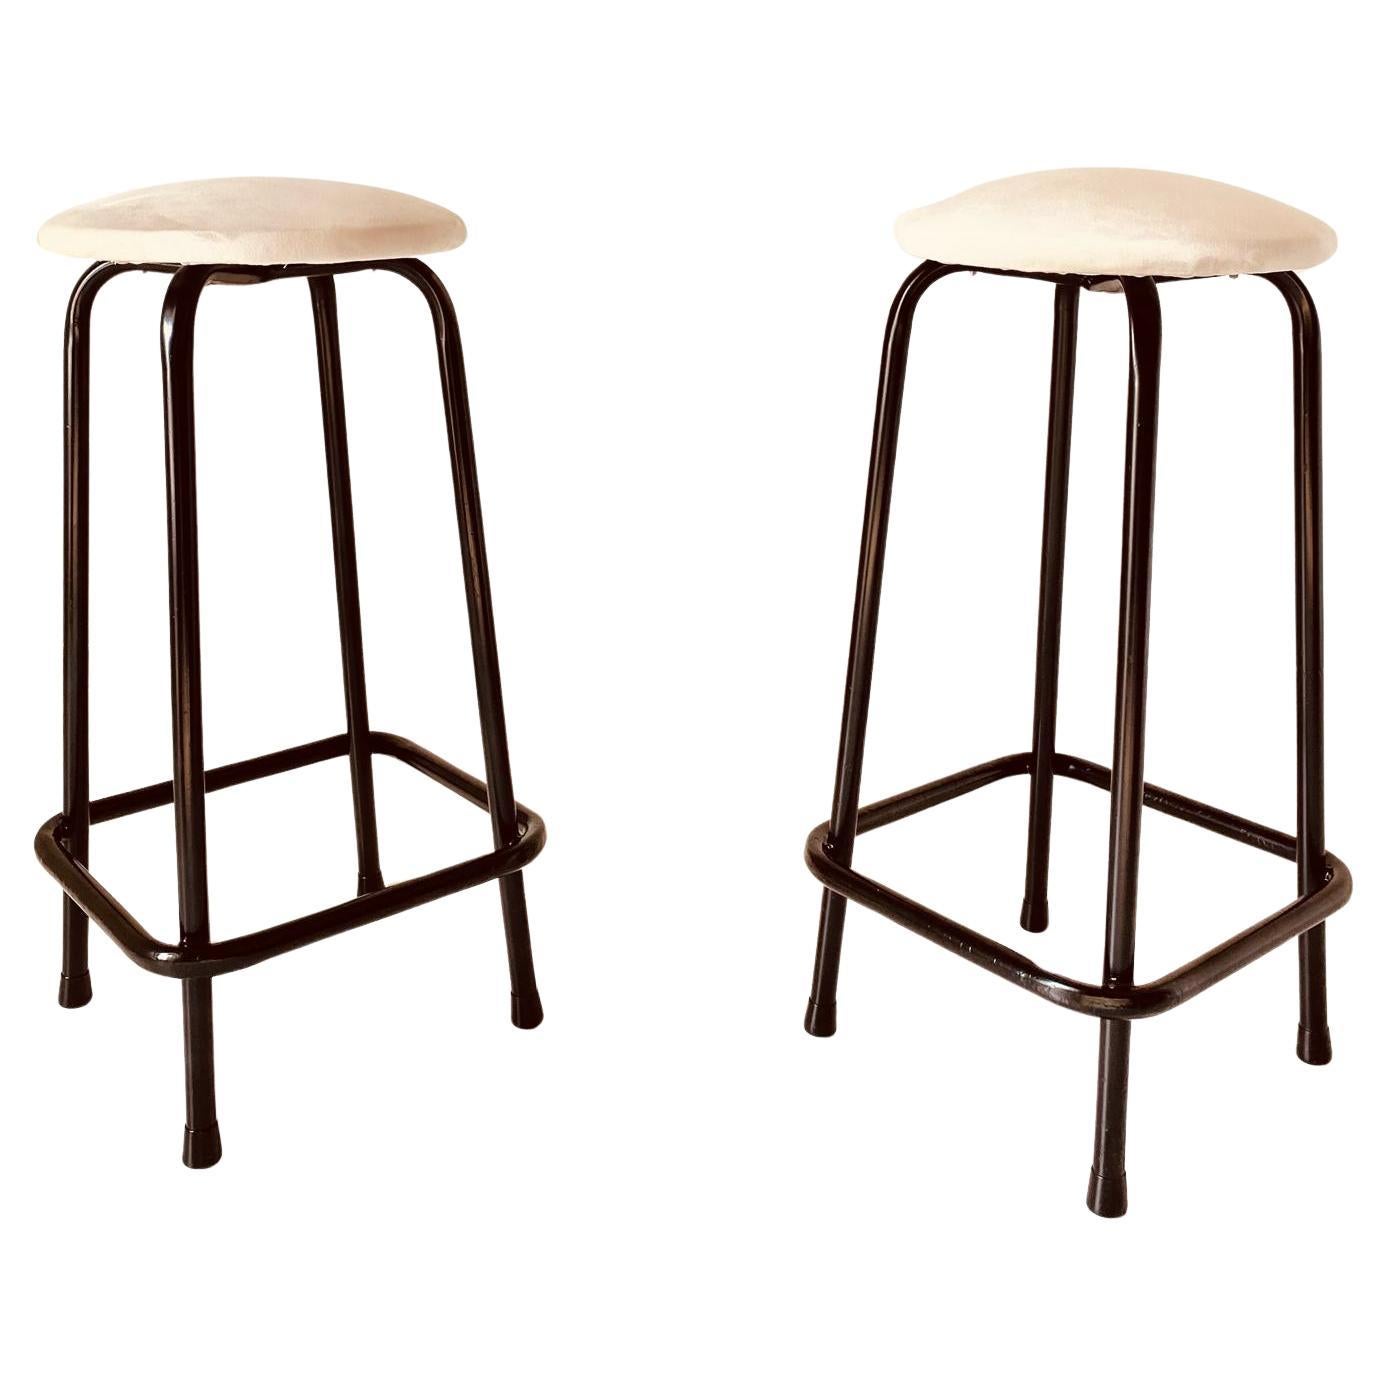 Mid-Century Modern Midcentury Modern Industrial Iron and Velvet Stools, Set of Two, Italy 1960s For Sale